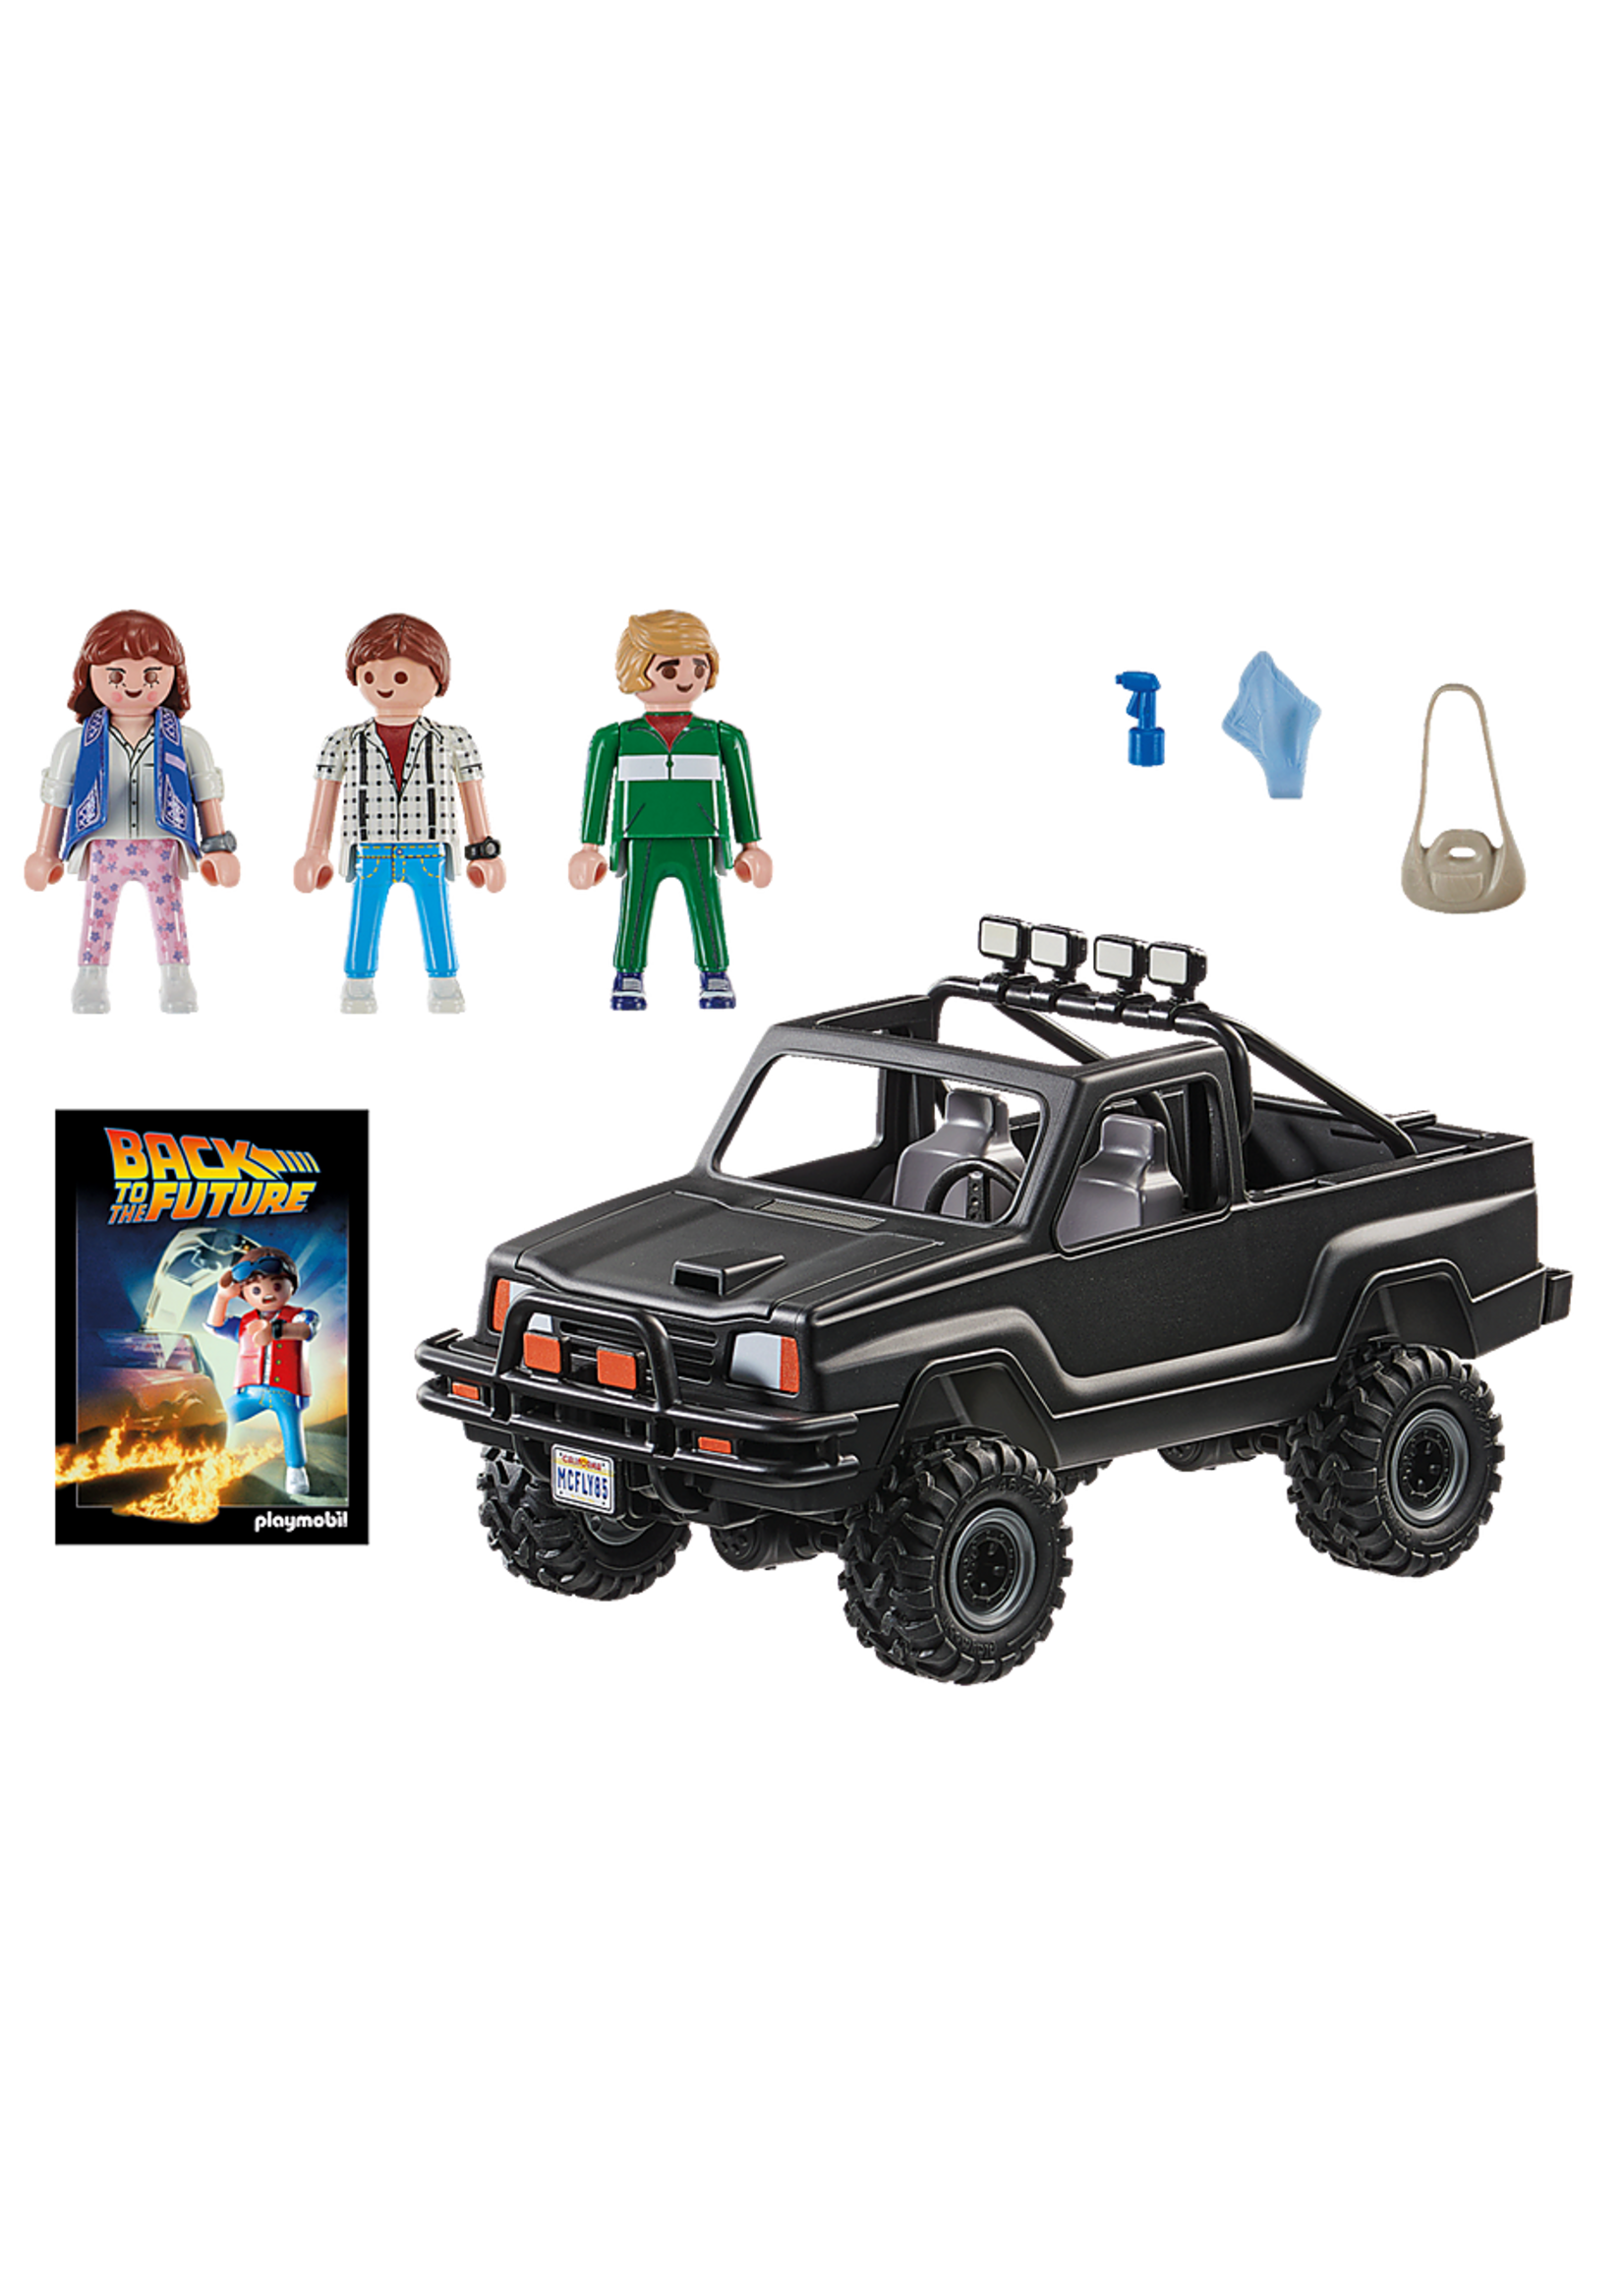 Playmobil Back to the Future Marty's Pick-up Truck